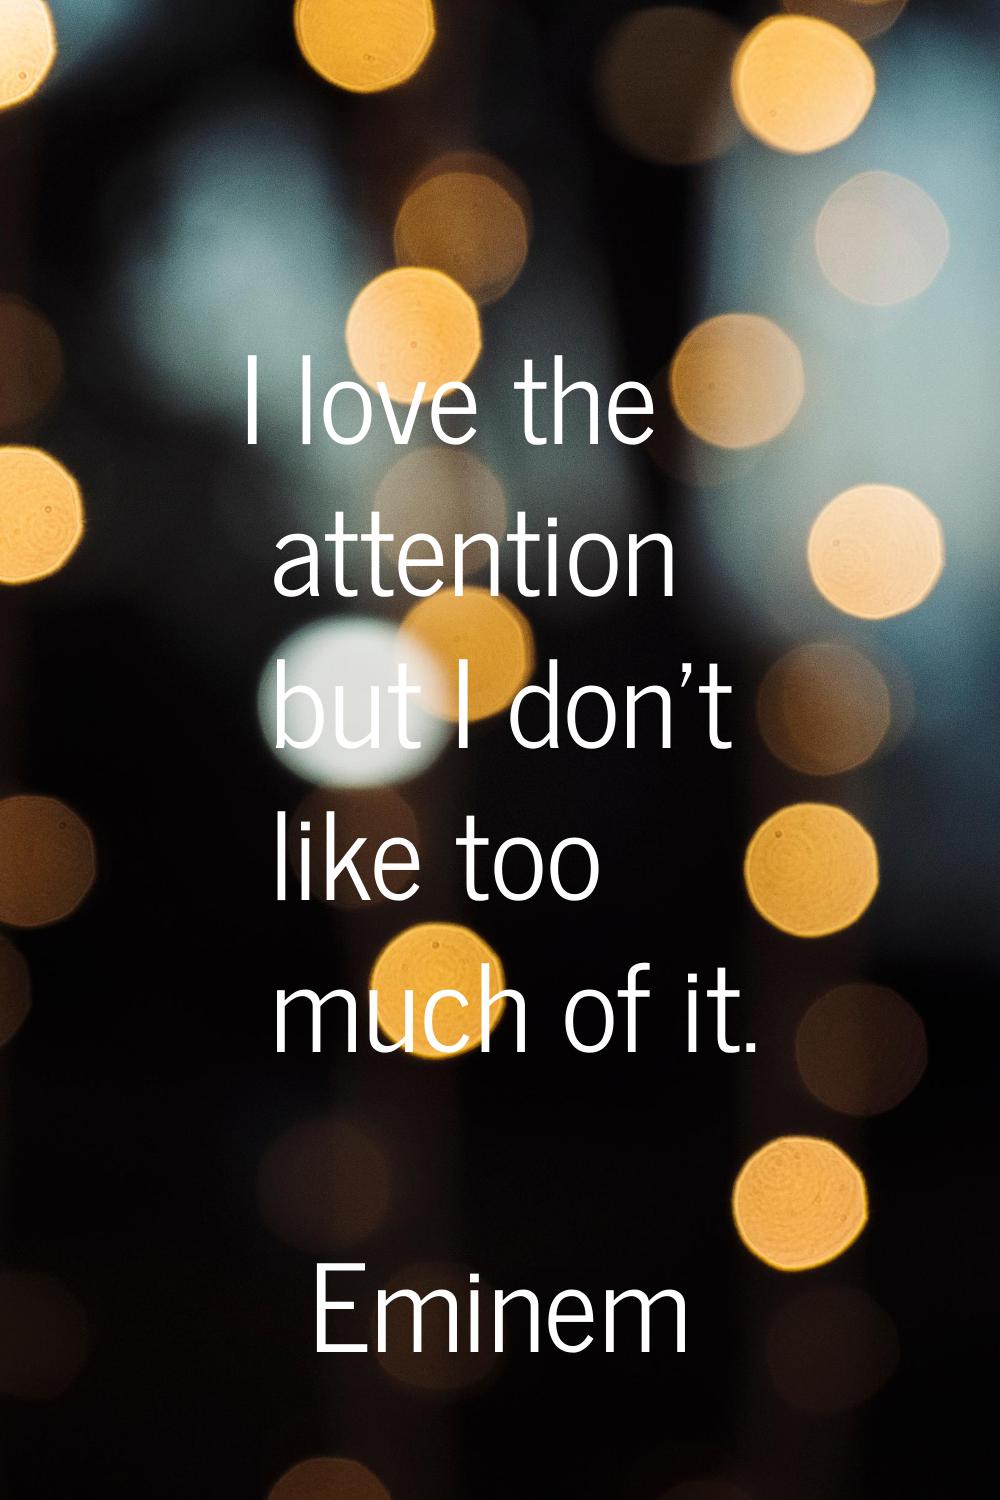 I love the attention but I don't like too much of it.